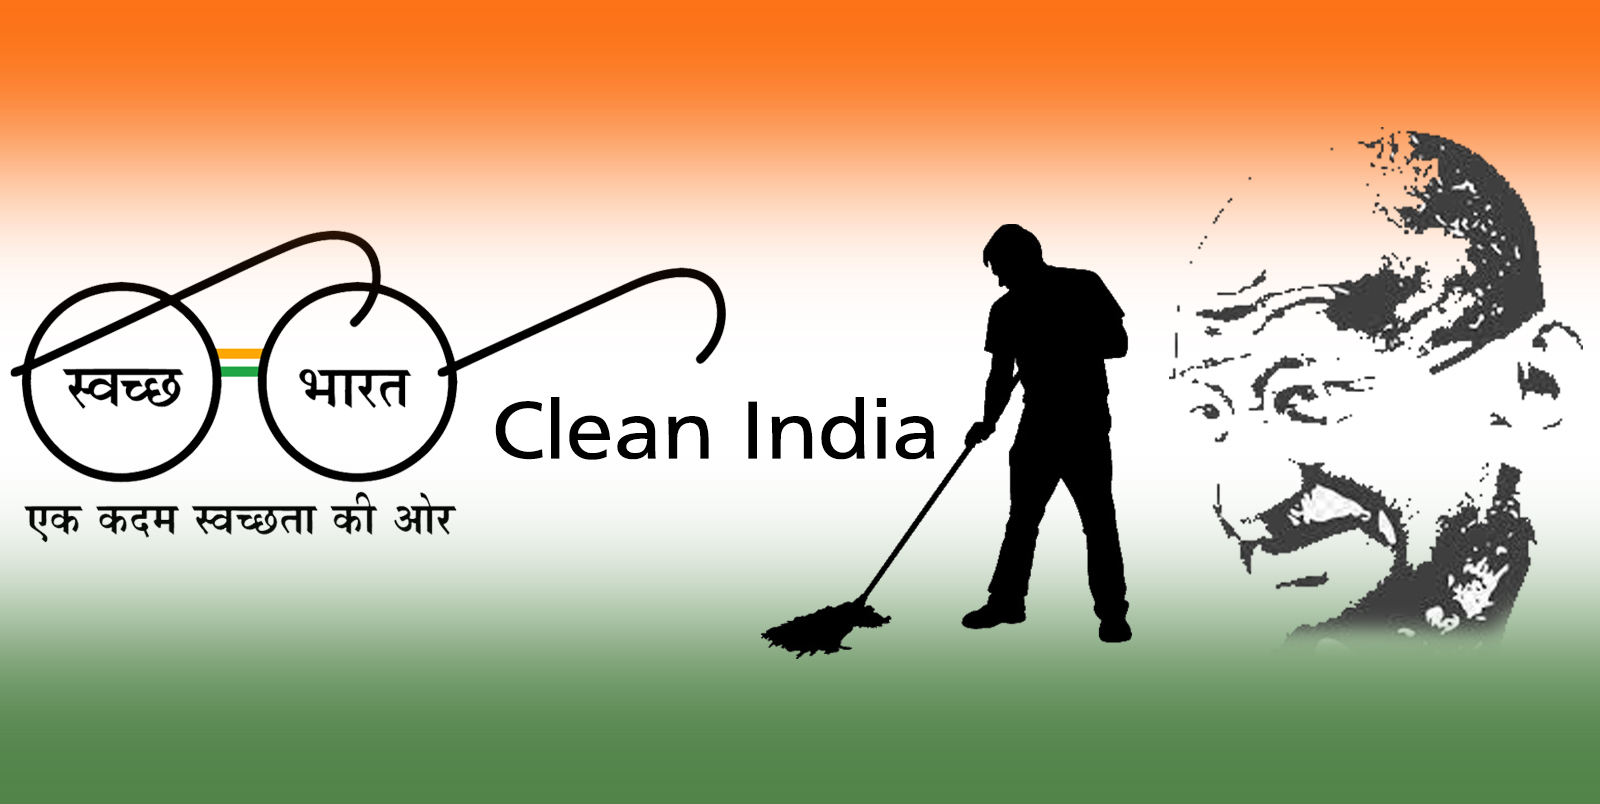 Clean India @Max Cleaner